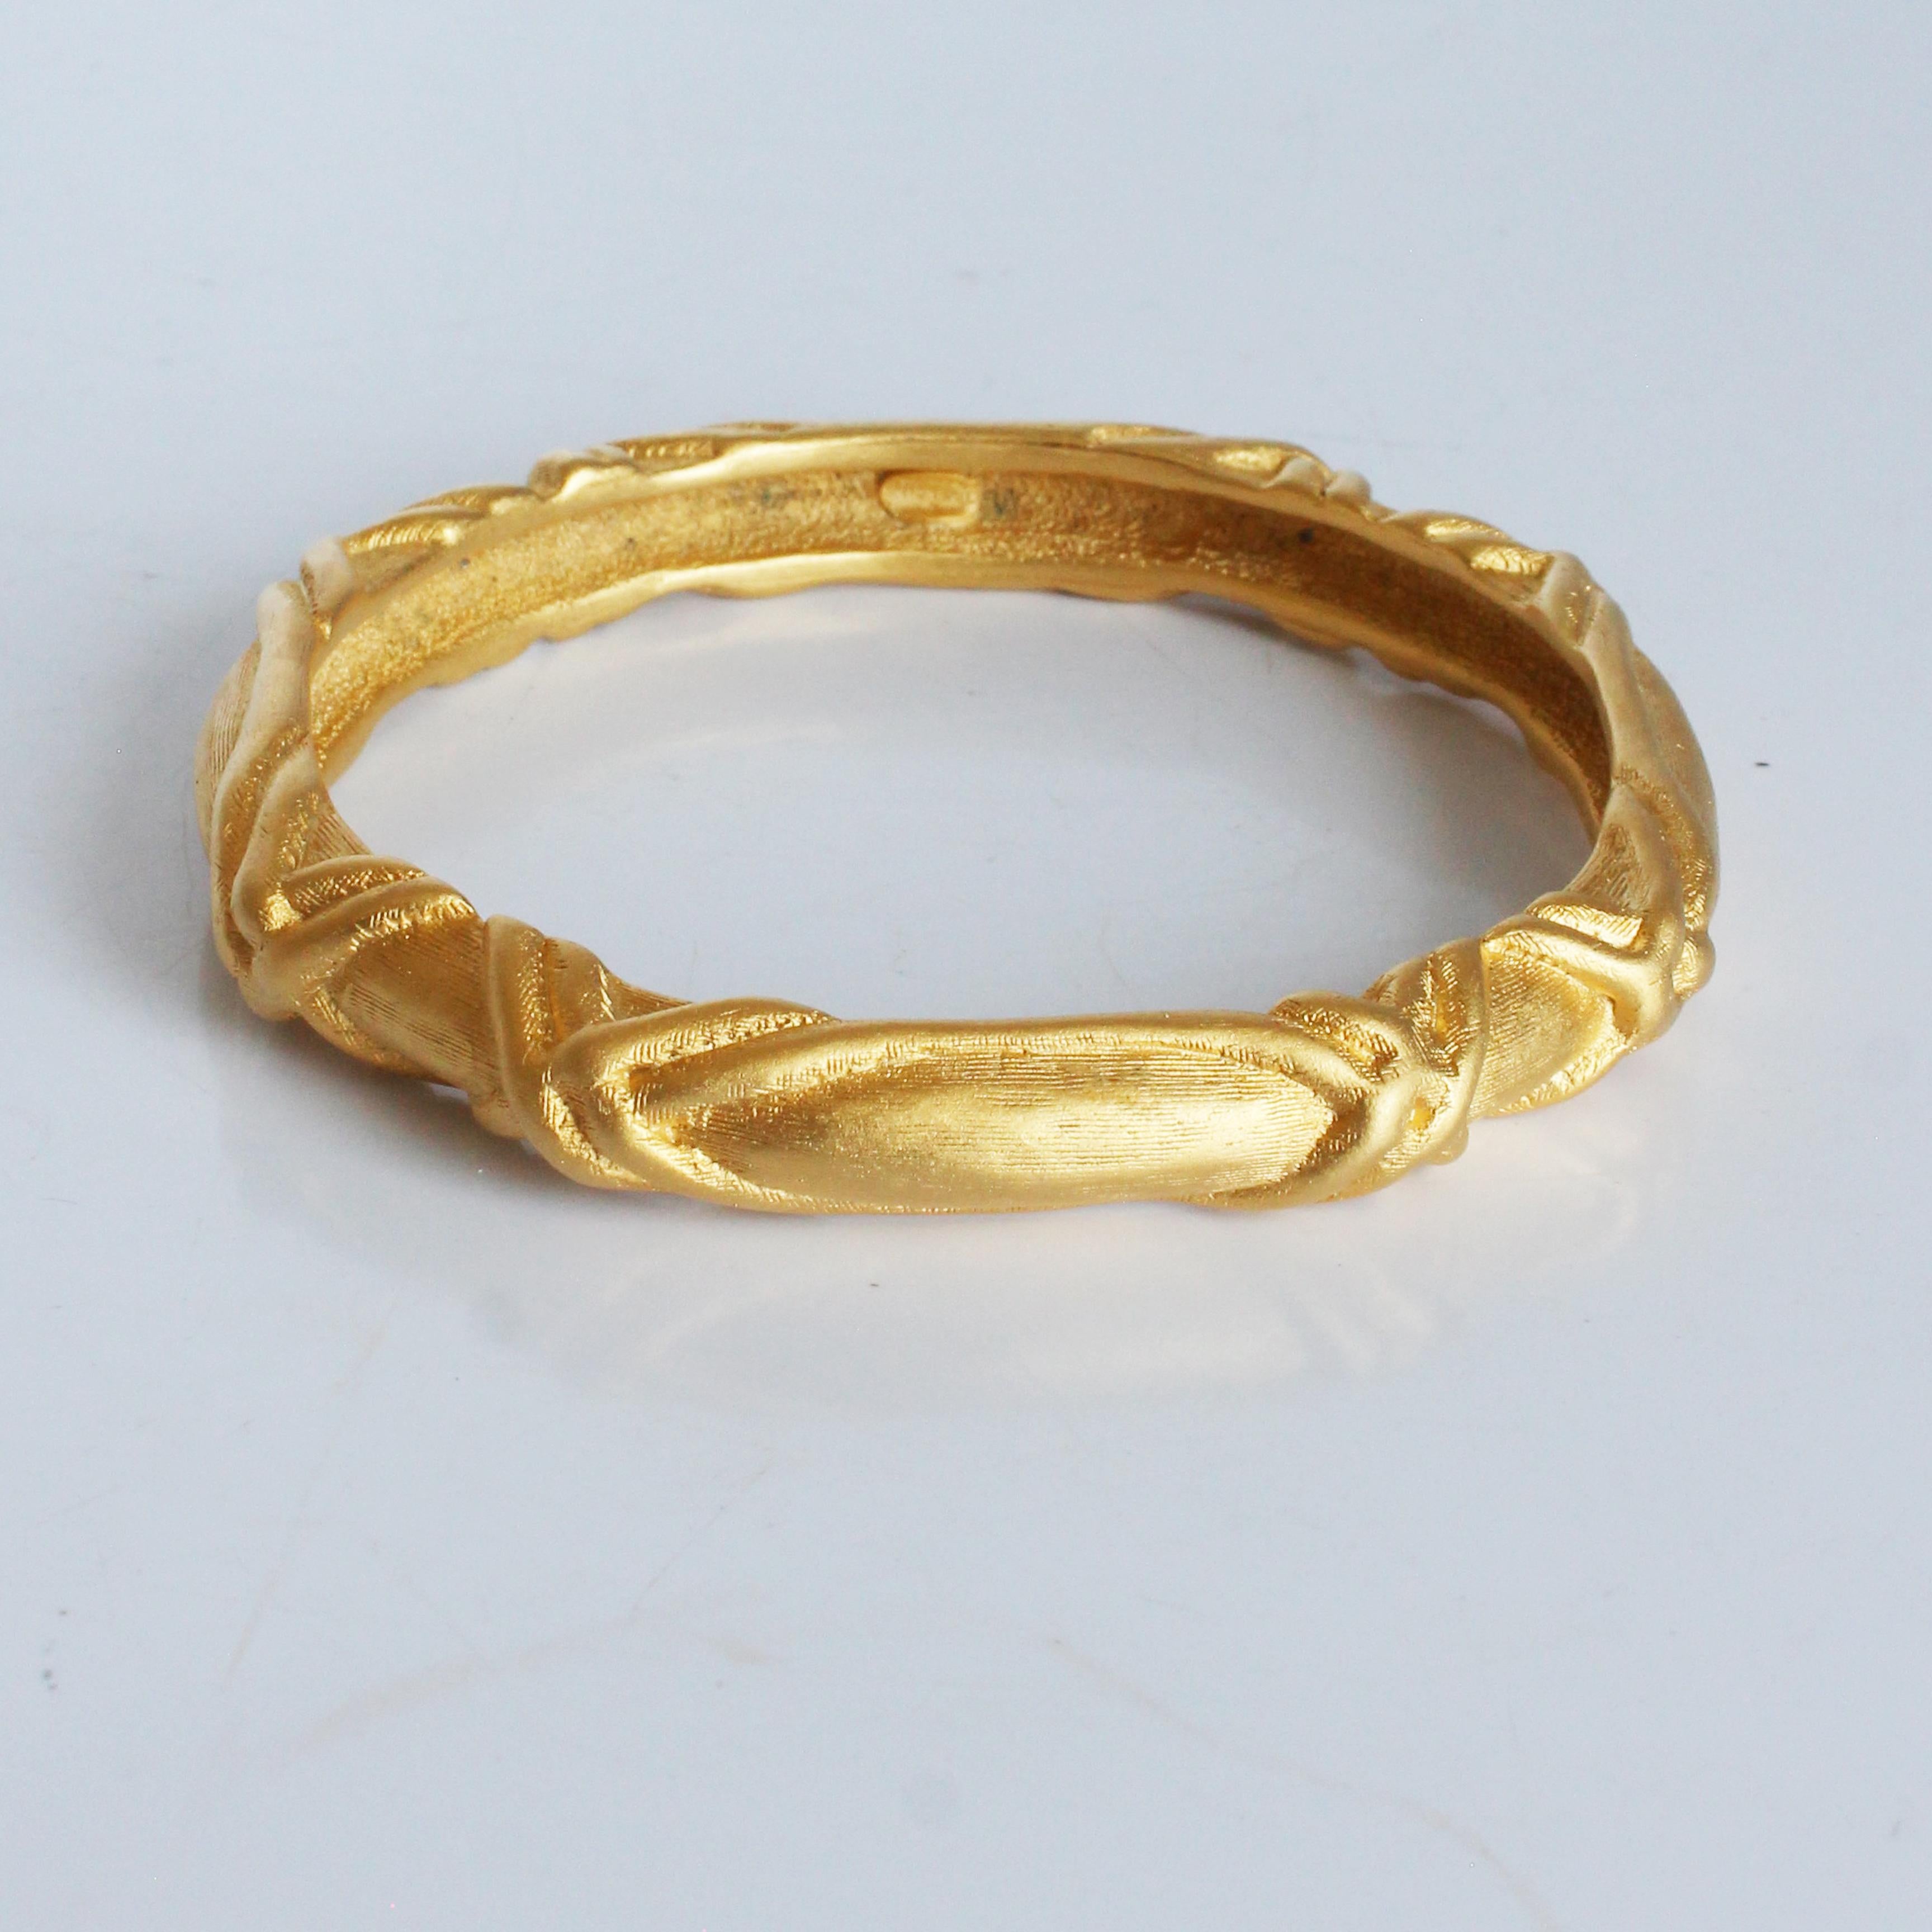 Givenchy Bracelet Bangle Gold Metal Textured Abstract Vintage 80s Jewelry  In Good Condition For Sale In Port Saint Lucie, FL